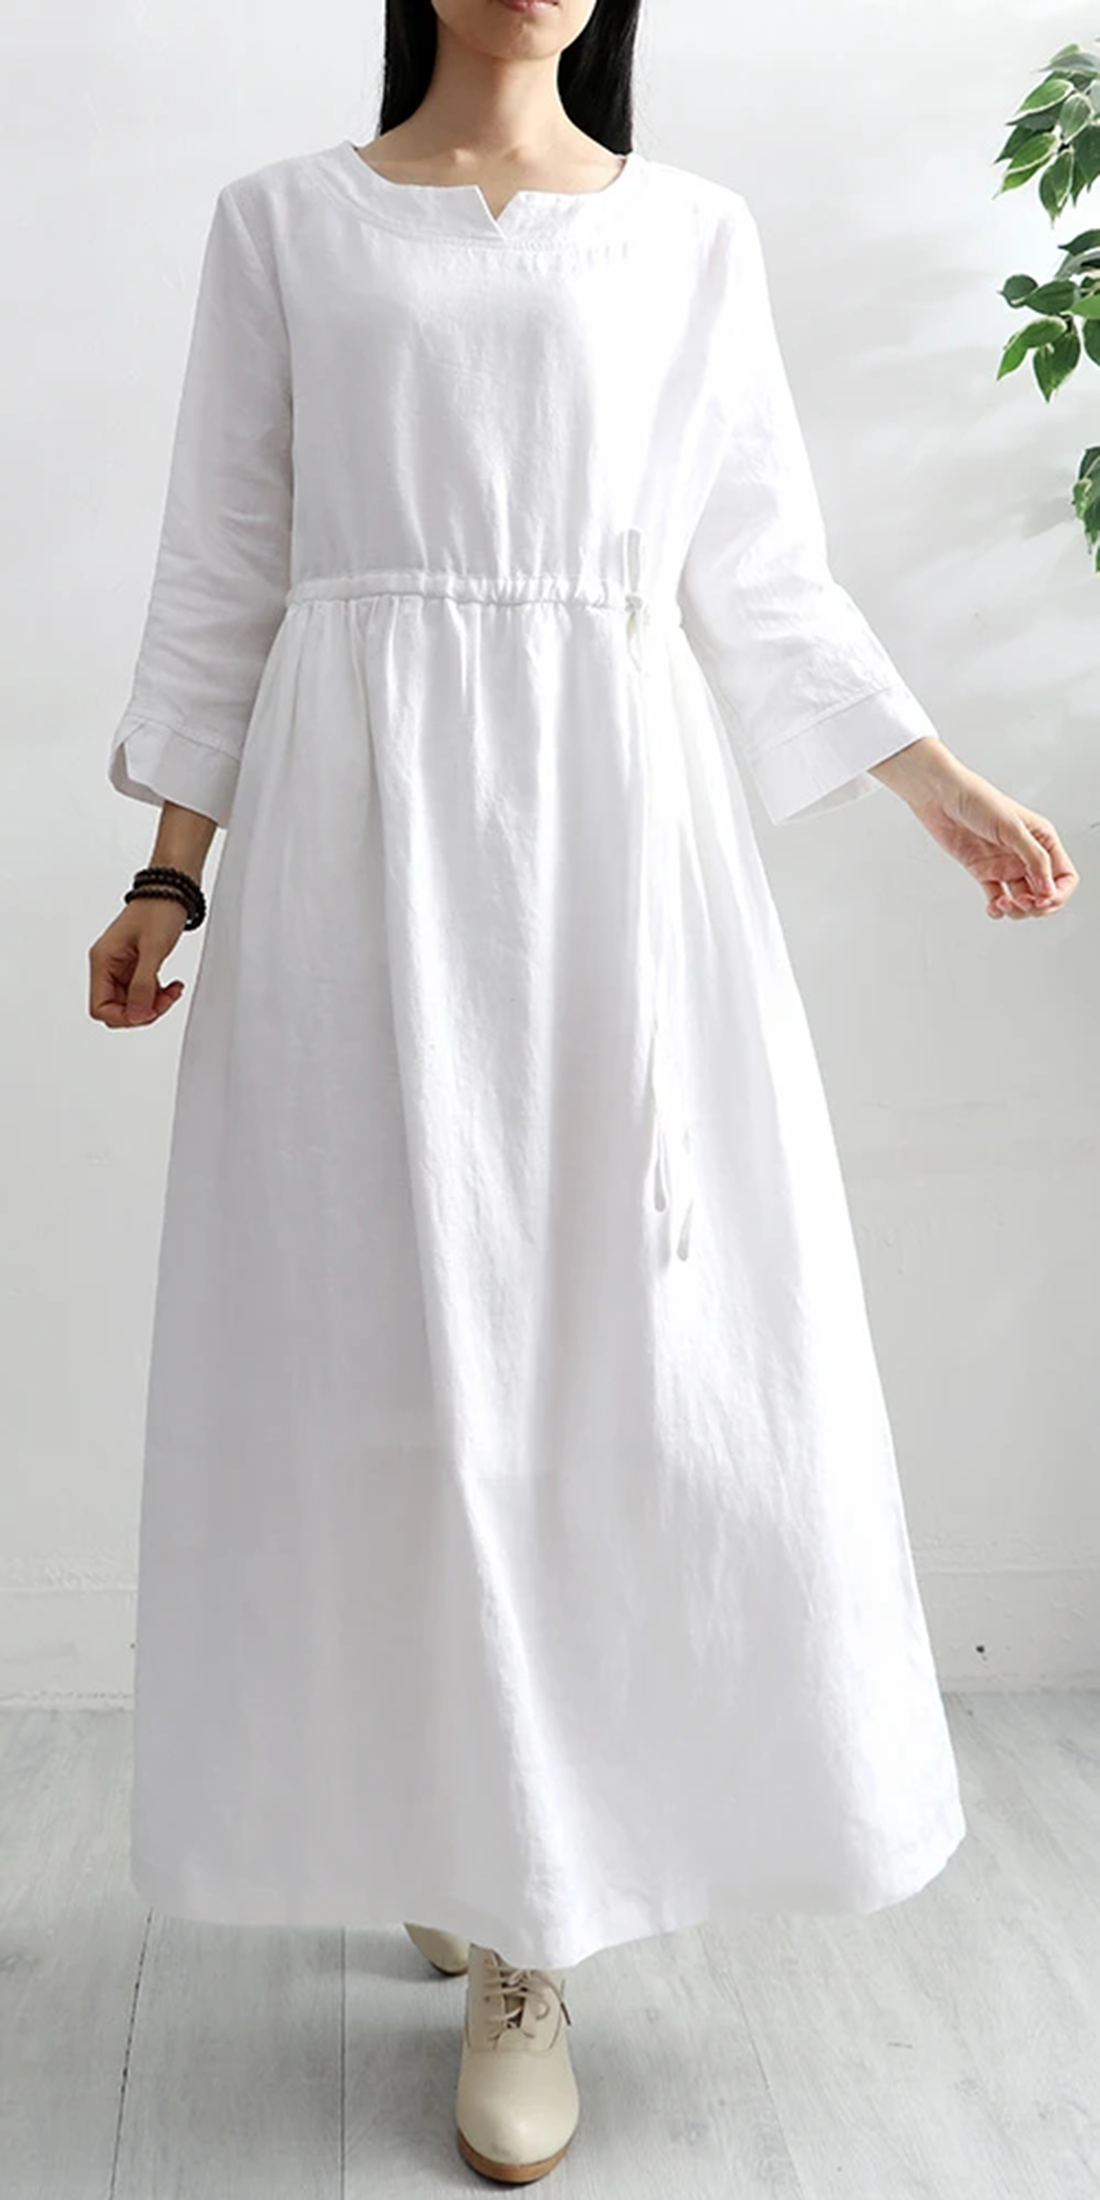 15 Breezy & Refreshing White Tunic Top Outfit Ideas for Ladies